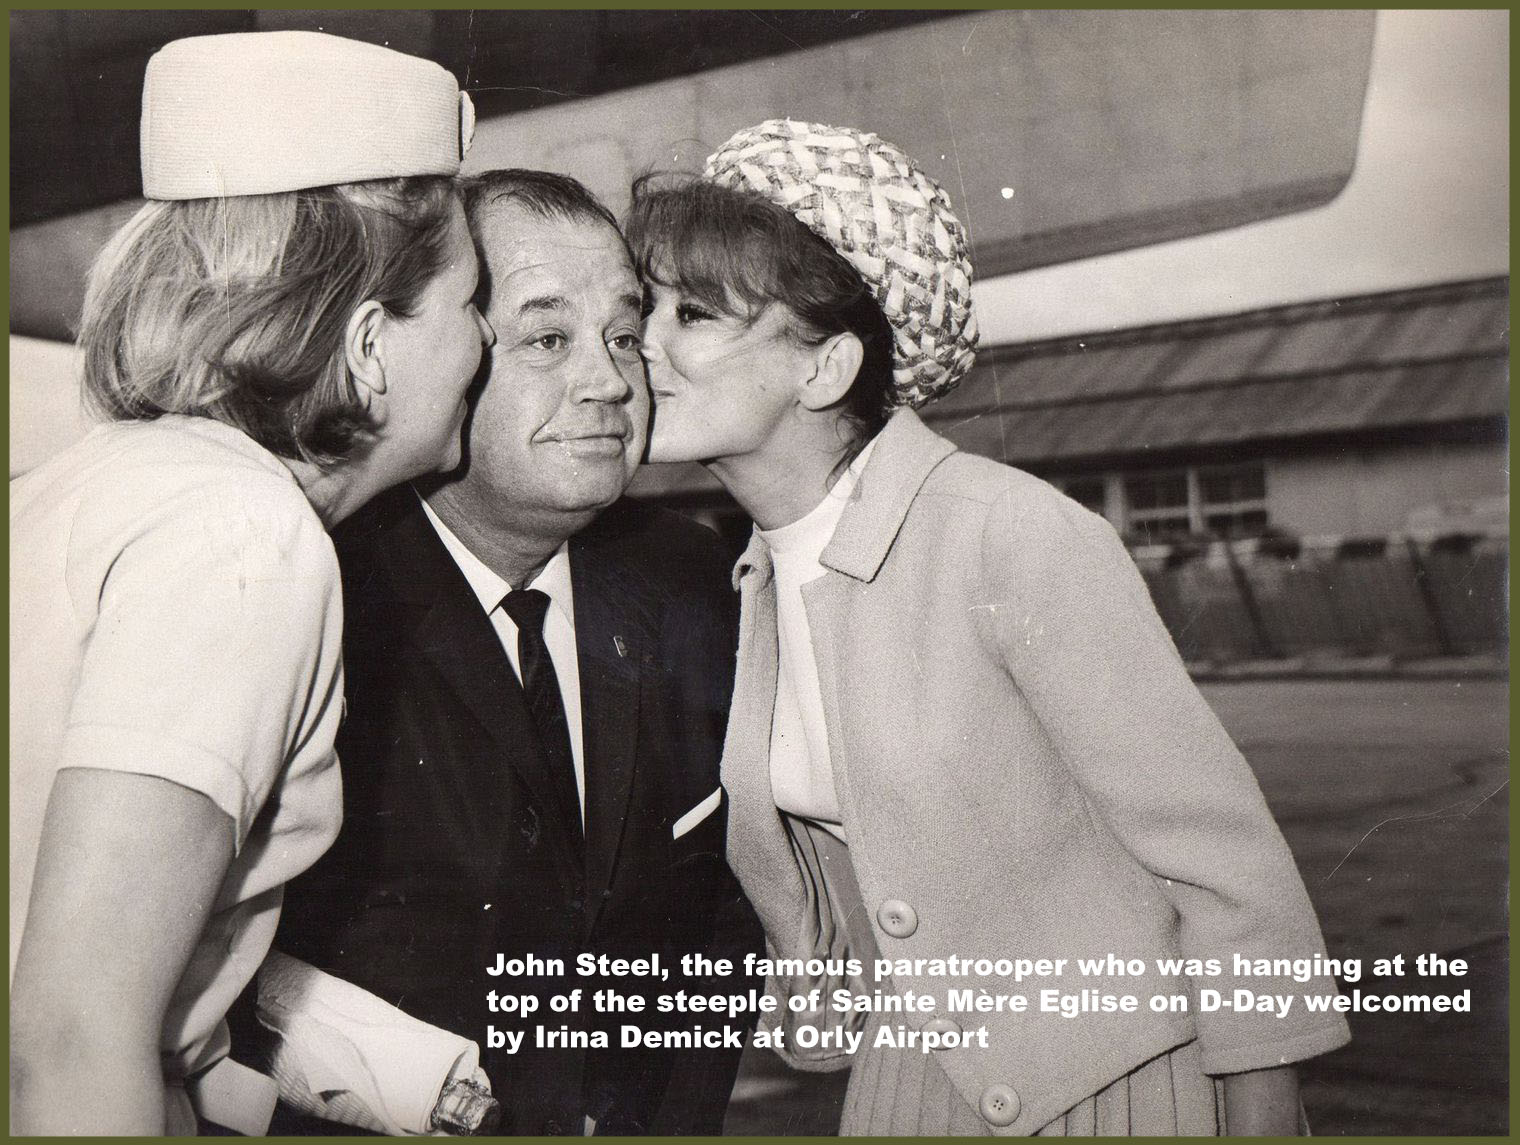 John Steel with the actress Irina Demick on the right Orly airport 1964 copy